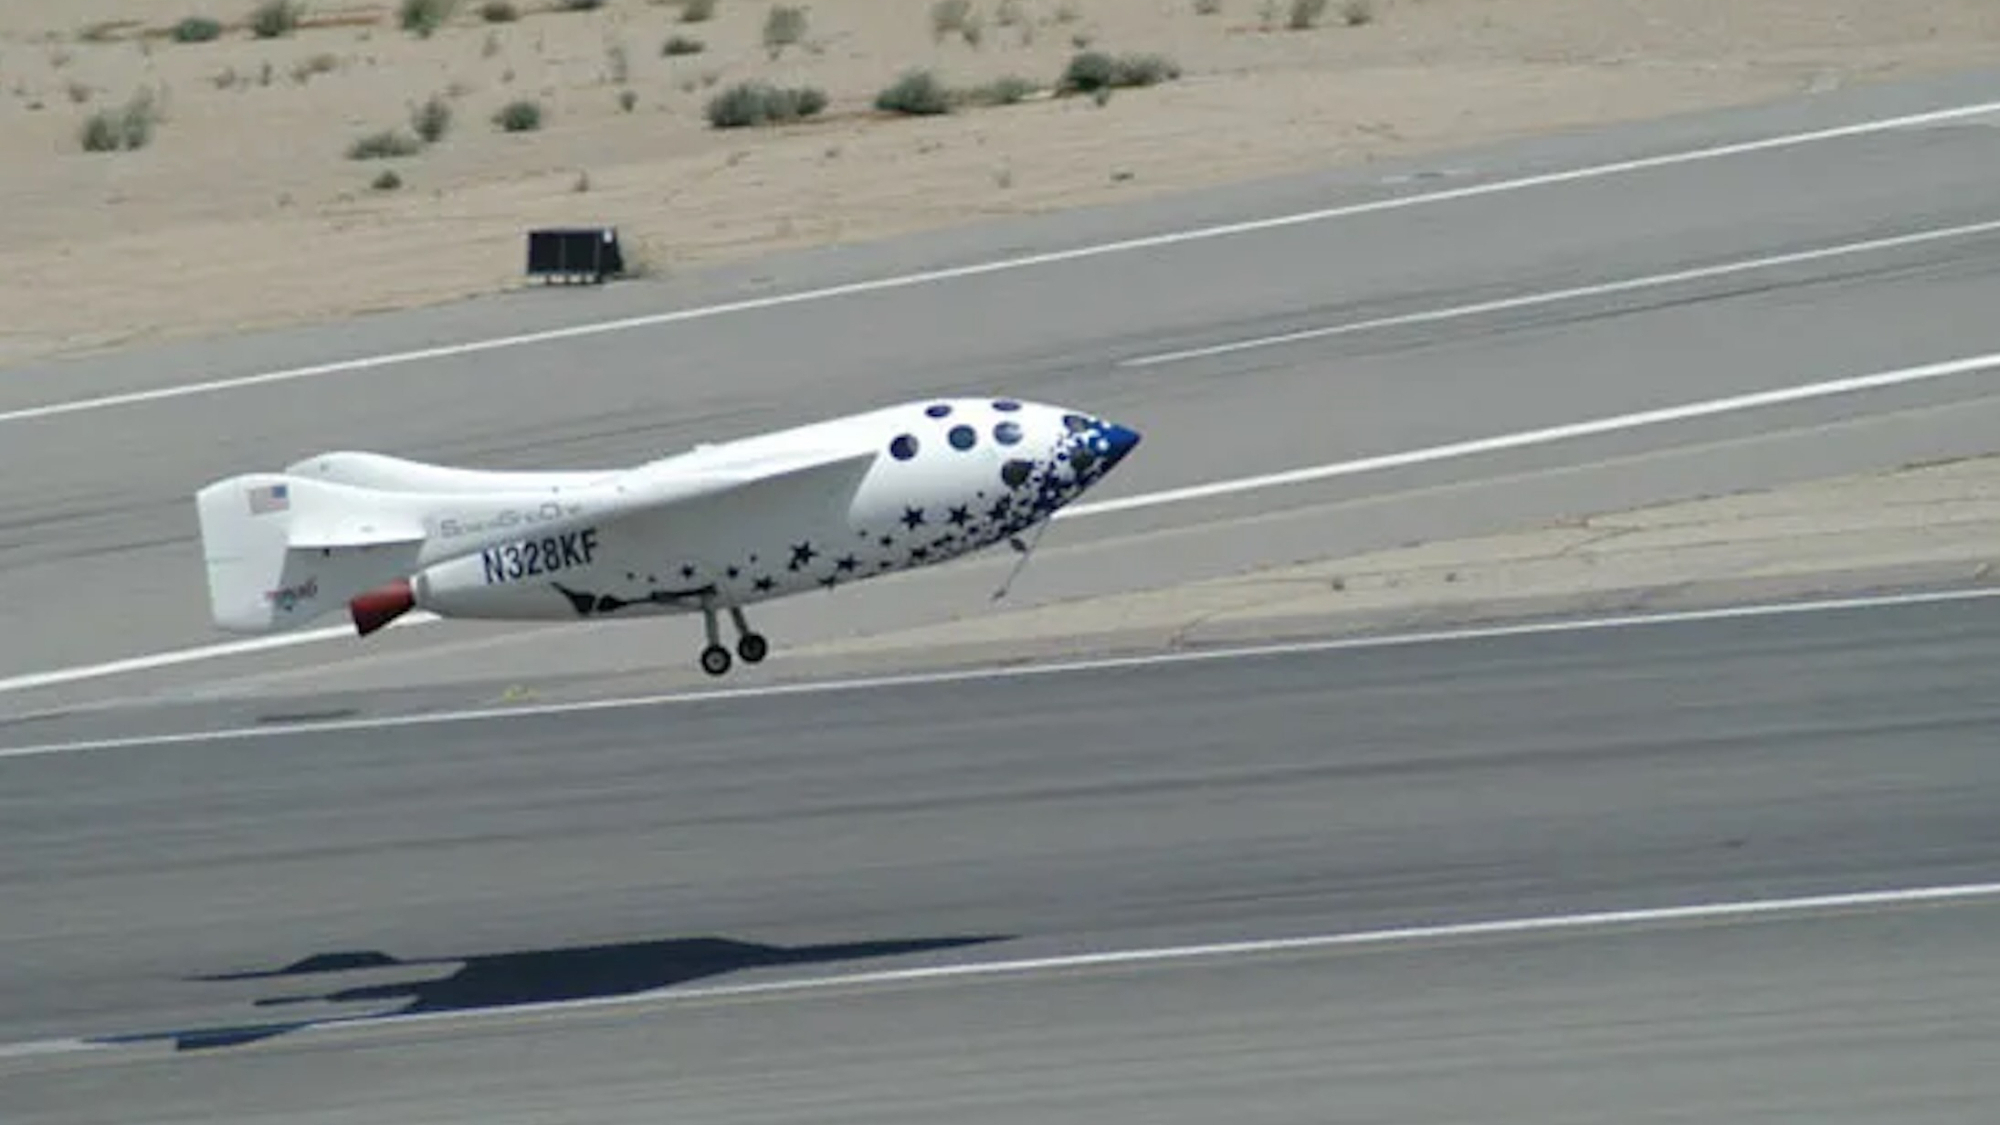  How SpaceShipOne's historic launch 20 years ago paved the way for a new space tourism era 